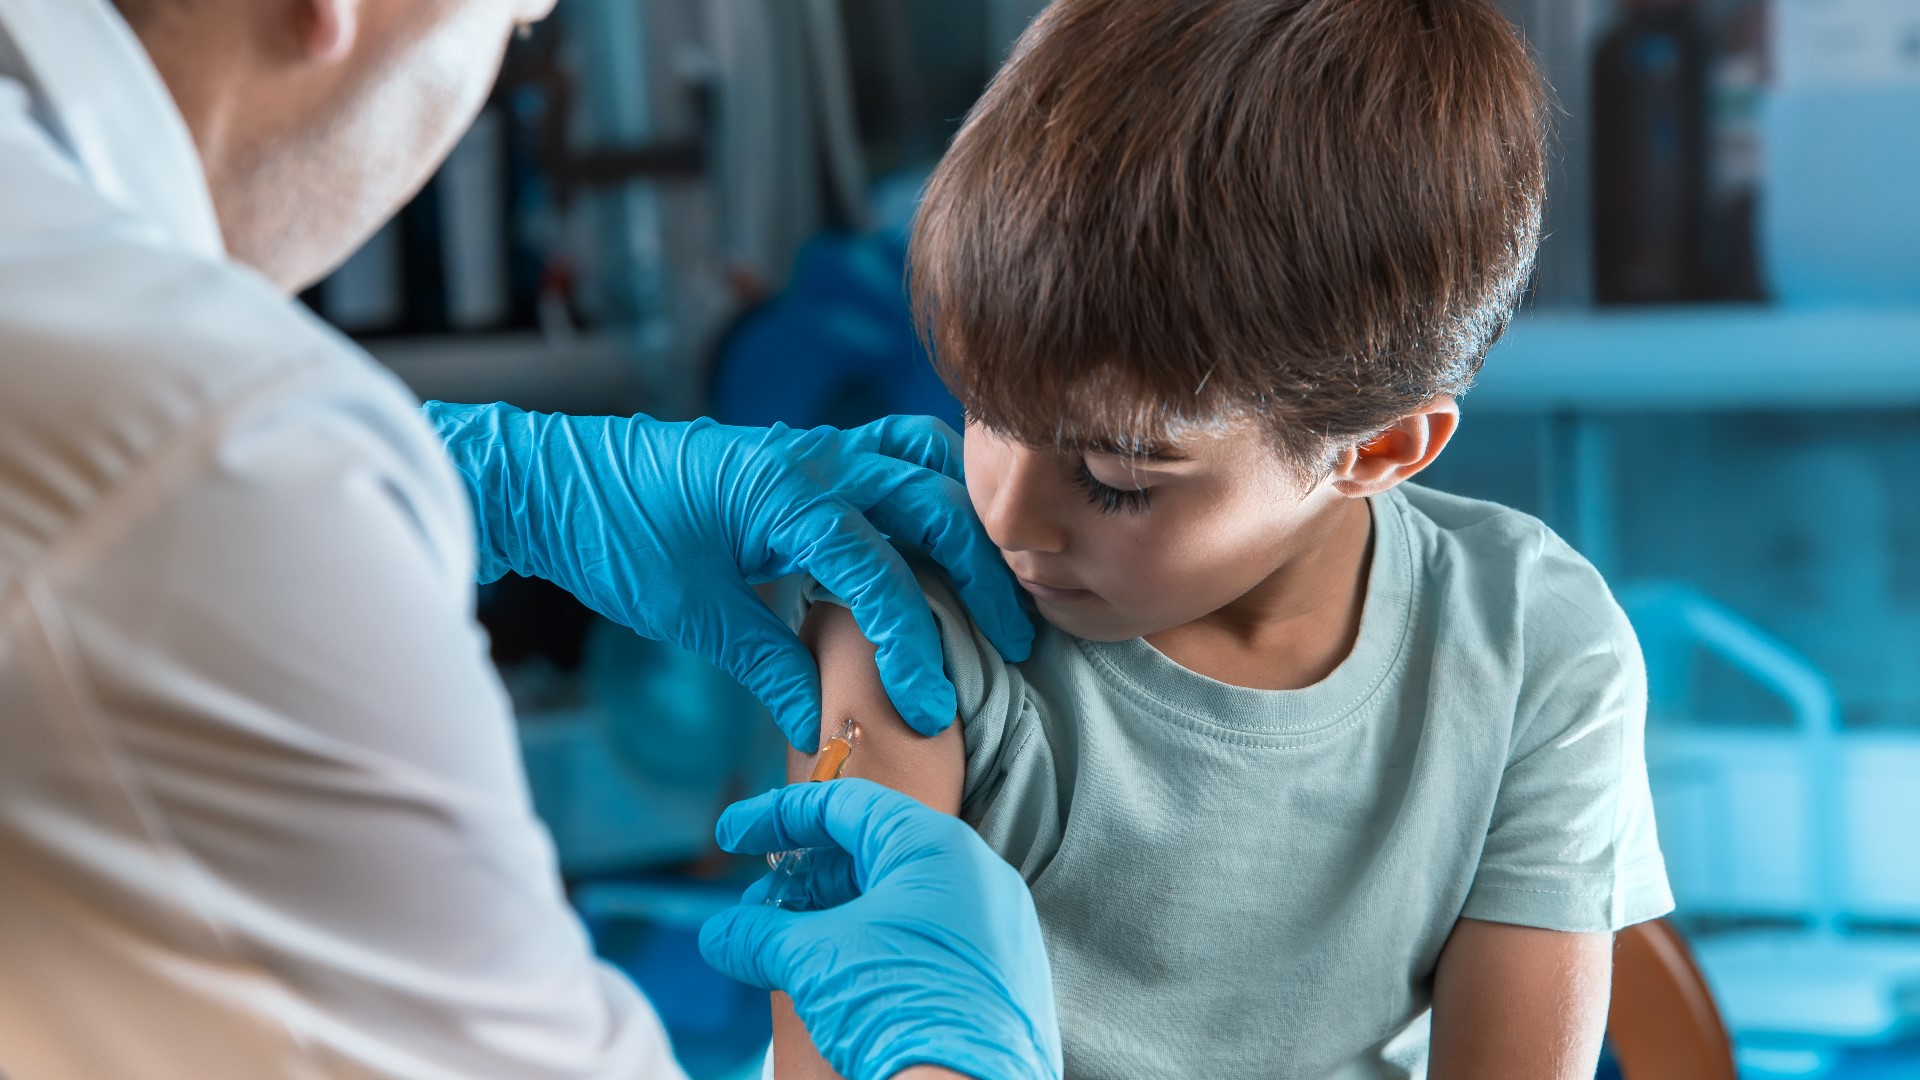 Millions of doses of the COVID-19 vaccine for children ages 5-11 are already being packaged up and shipped out ahead of the CDC approval.